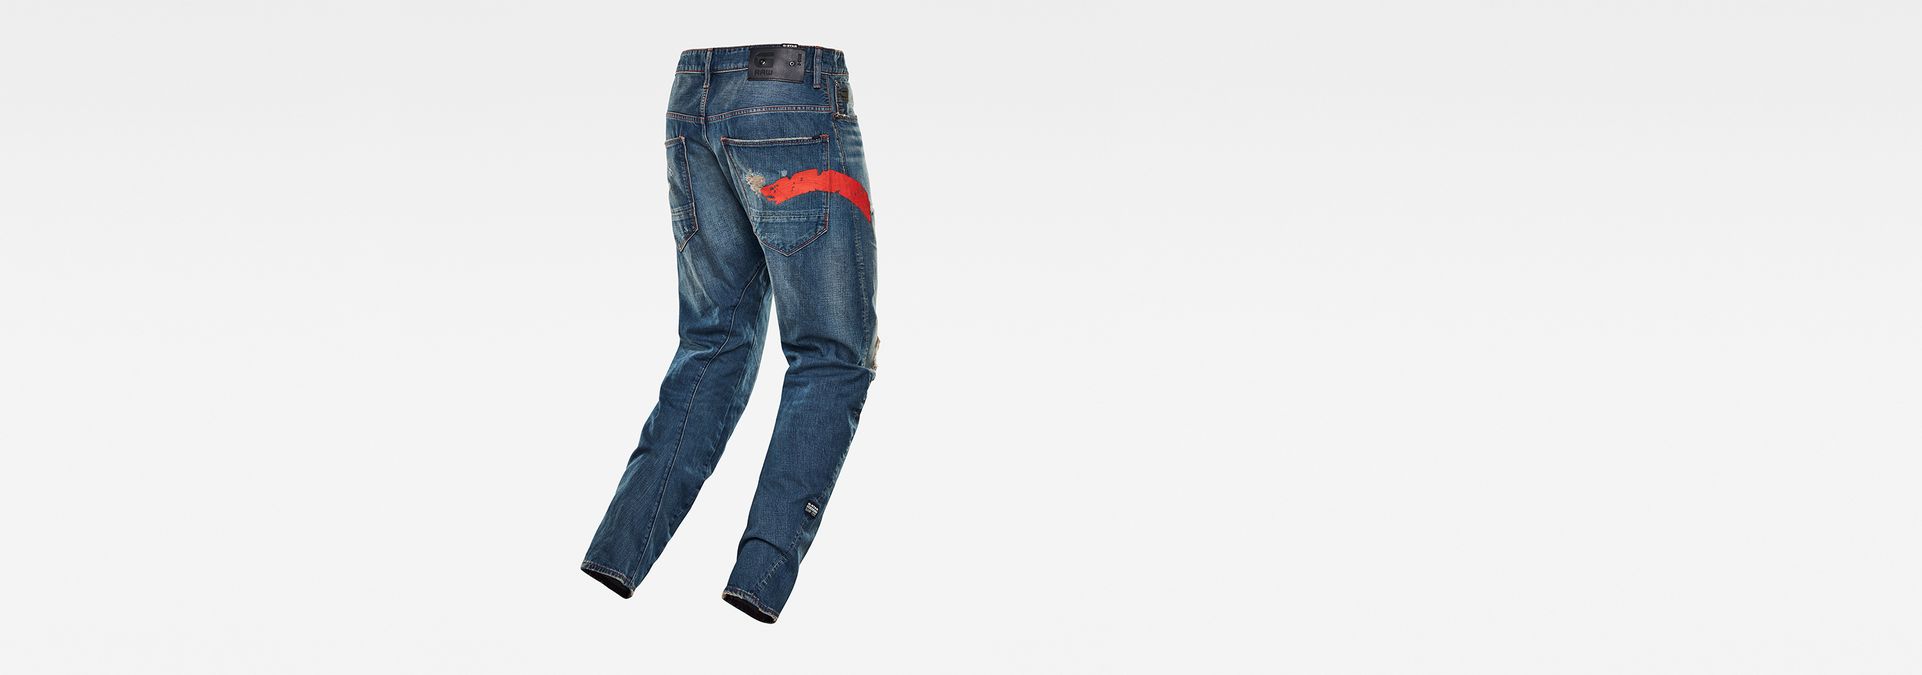 E Arc 3D Relaxed Tapered Jeans | ミディアムブルー | G-Star RAW®